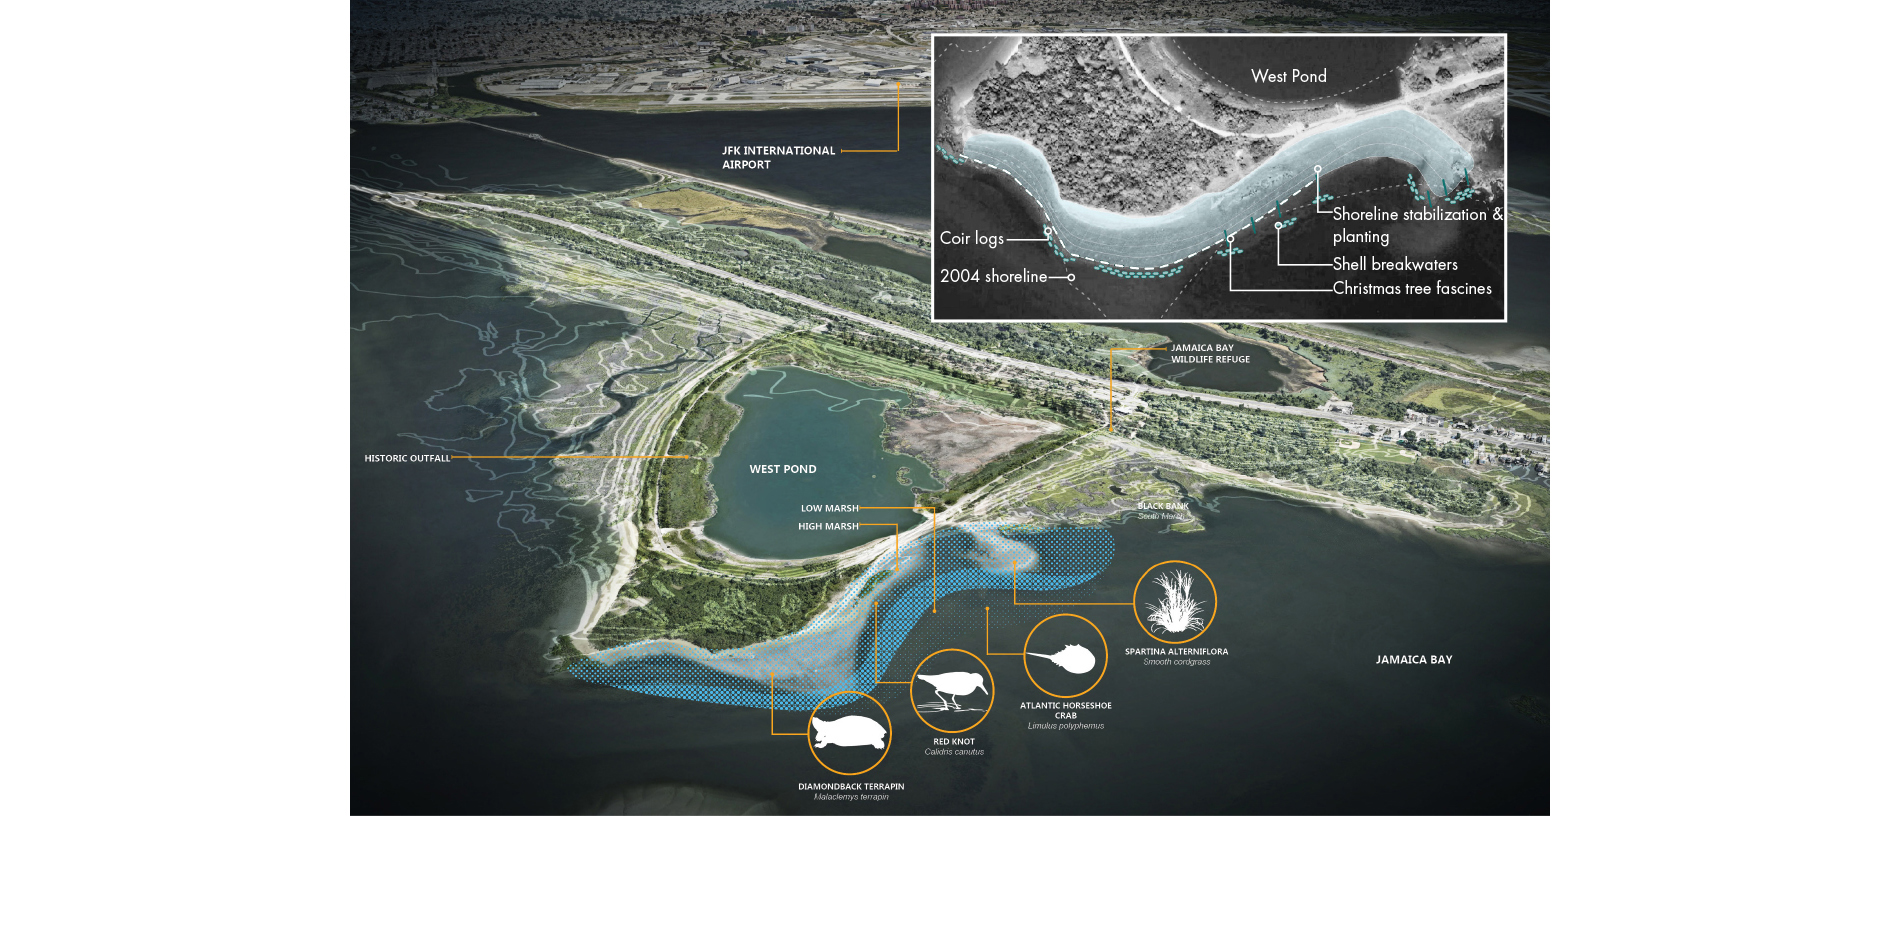 Site Plan: As a living shoreline, the restoration project uses natural breakwater features to protect the freshwater West Pond.